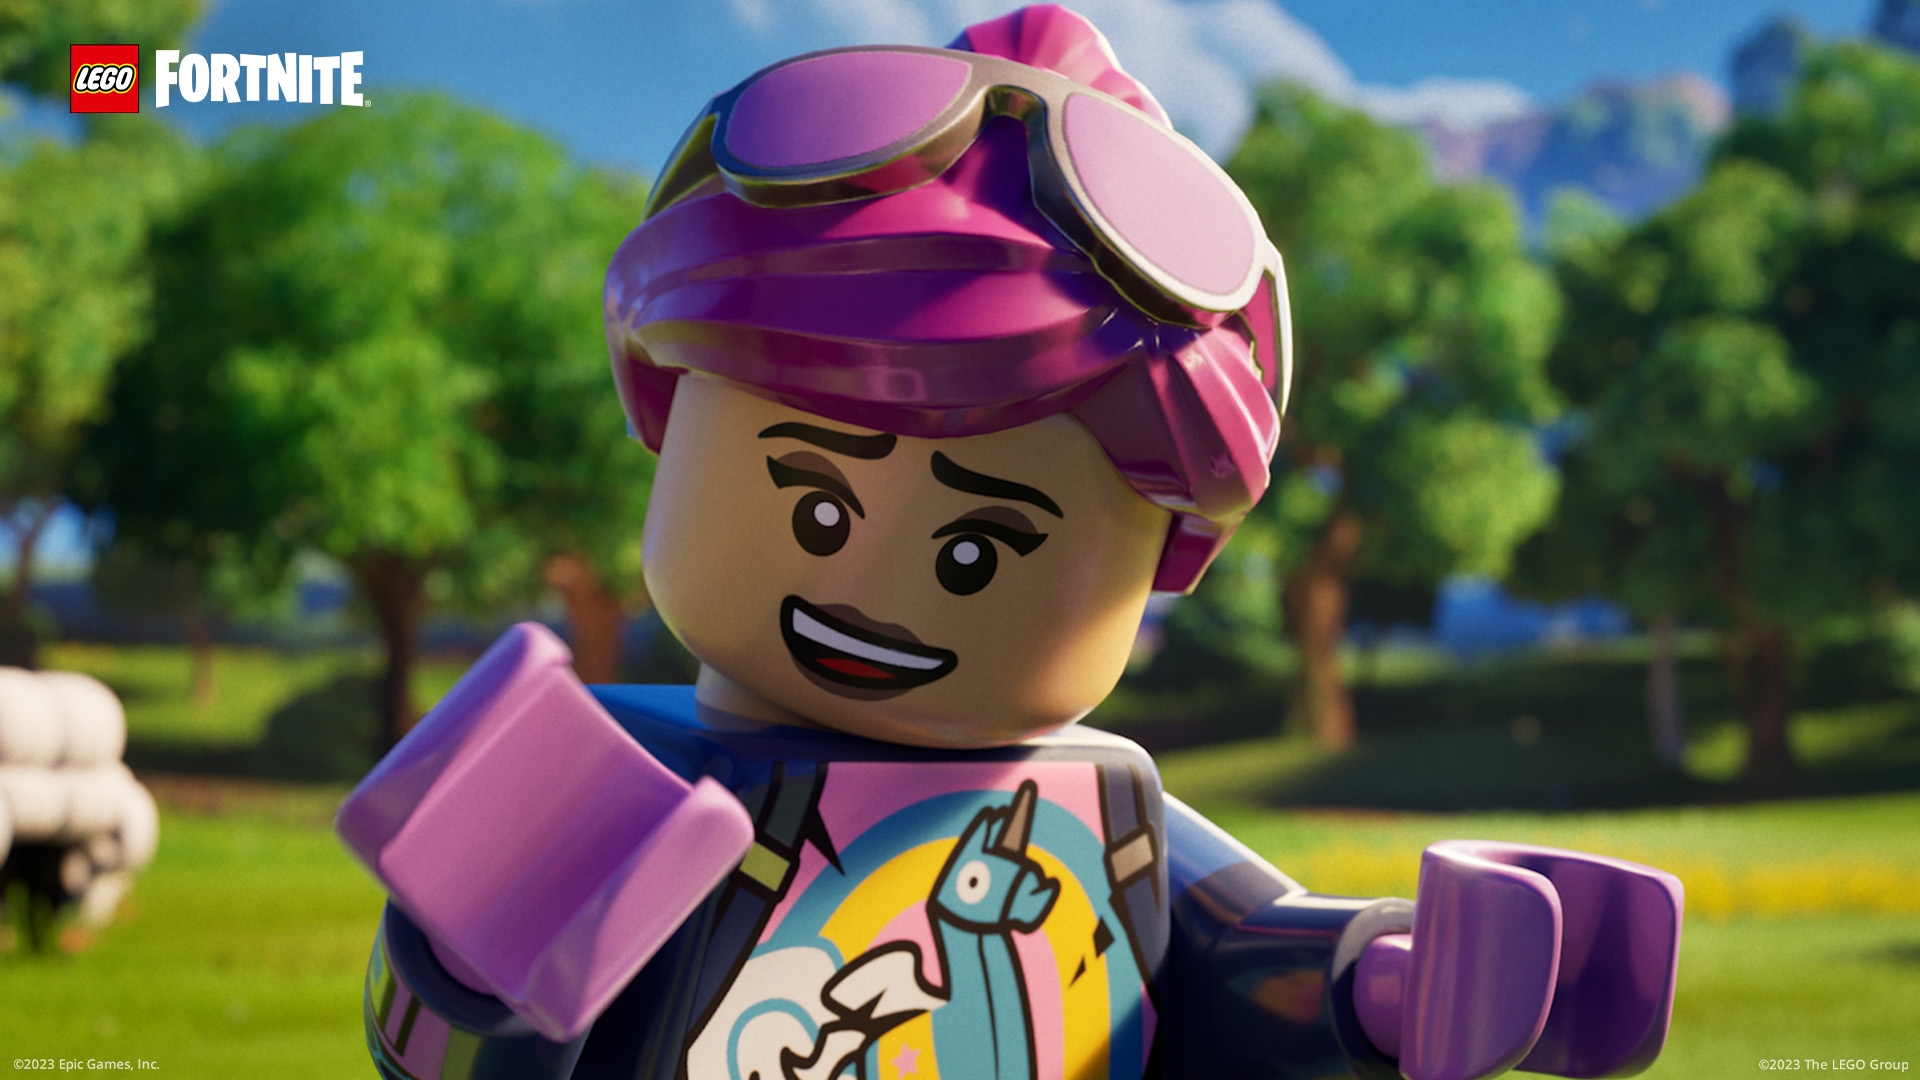 LEGO Fortnite trailer reveals an epic crafting adventure is on the way -  Meristation